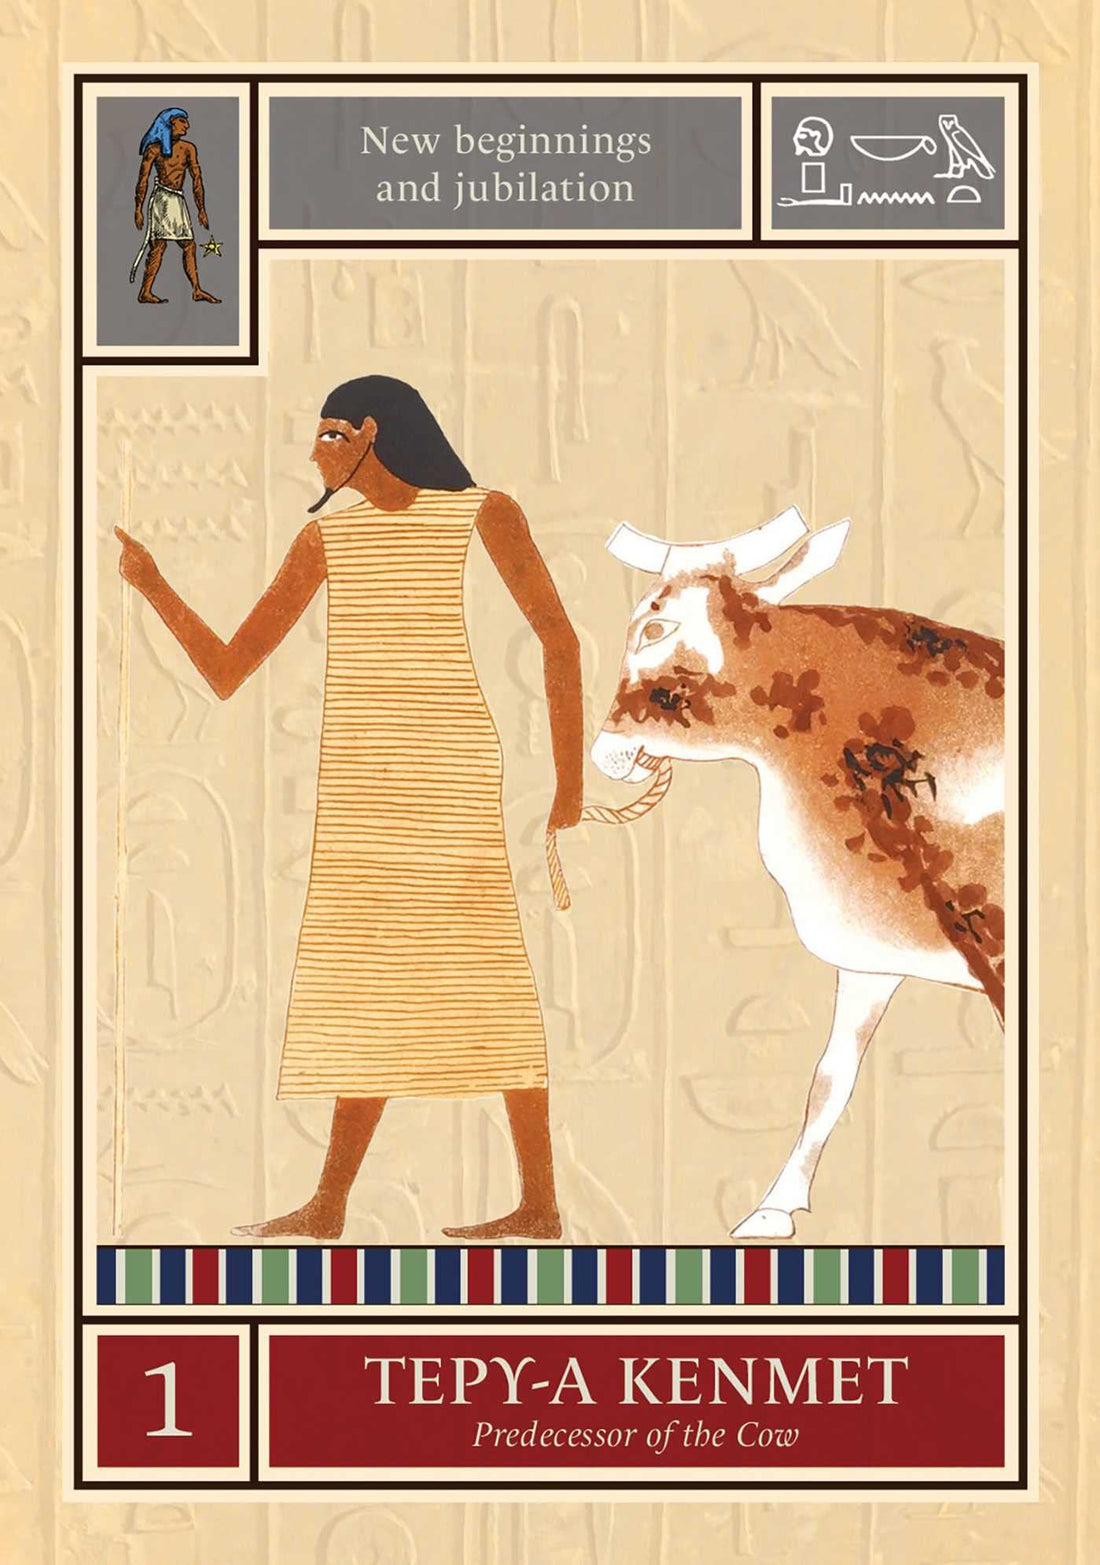 Egyptian Star Oracle, guidebook, 42 cards